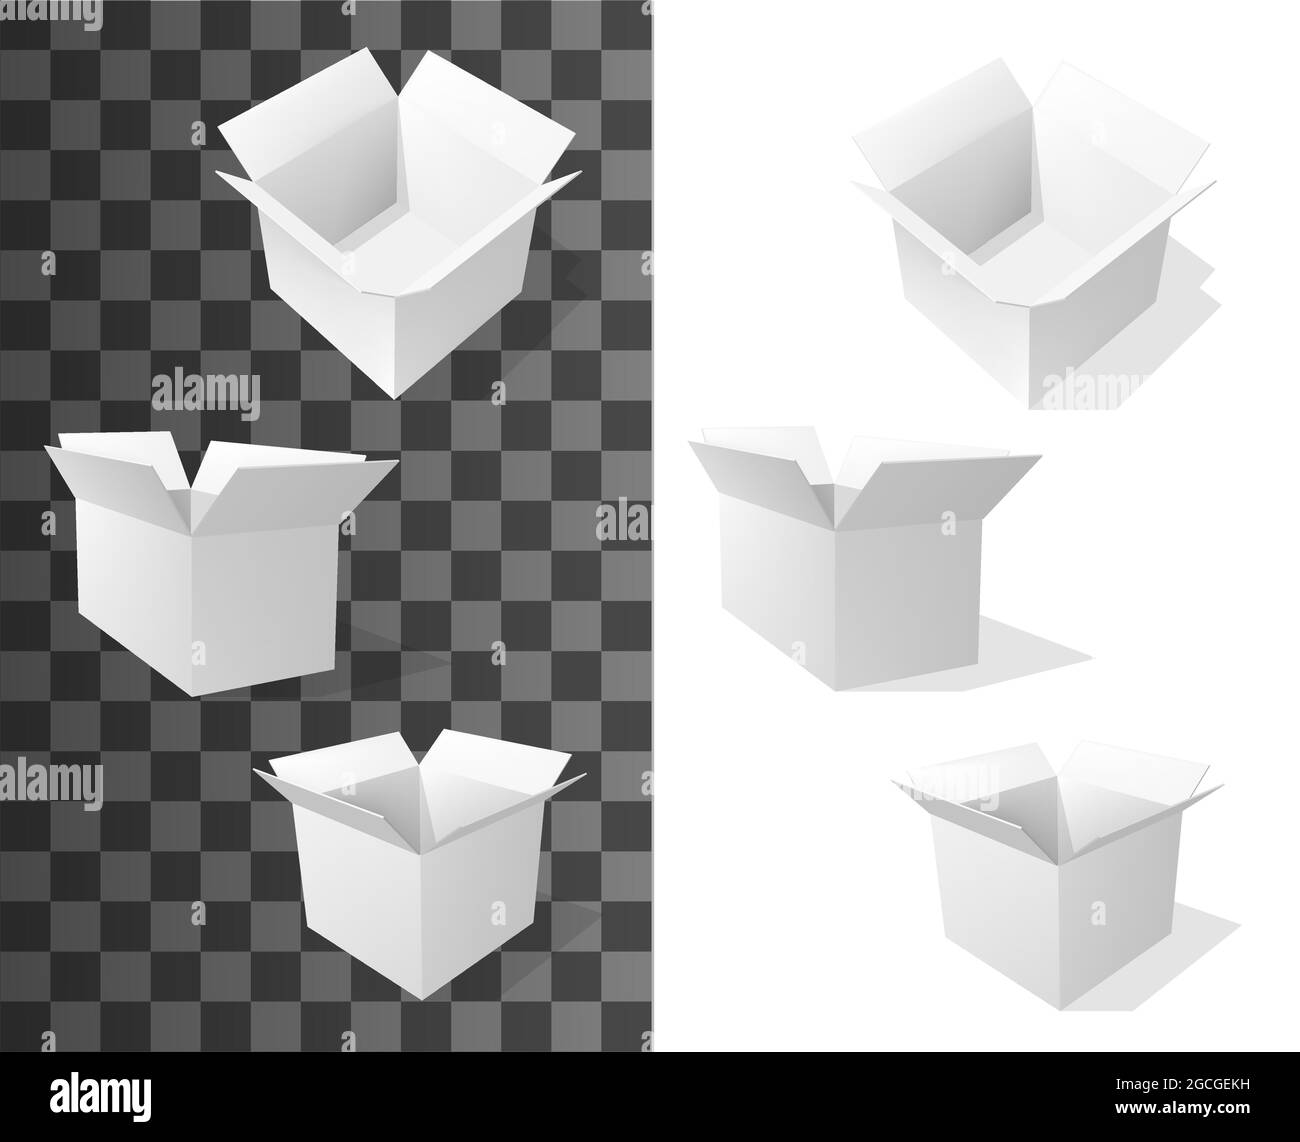 Square cardboard boxes, realistic vector packaging. White packages mockup made of blank paper carton, 3d delivery packs, shipping containers, mail par Stock Vector